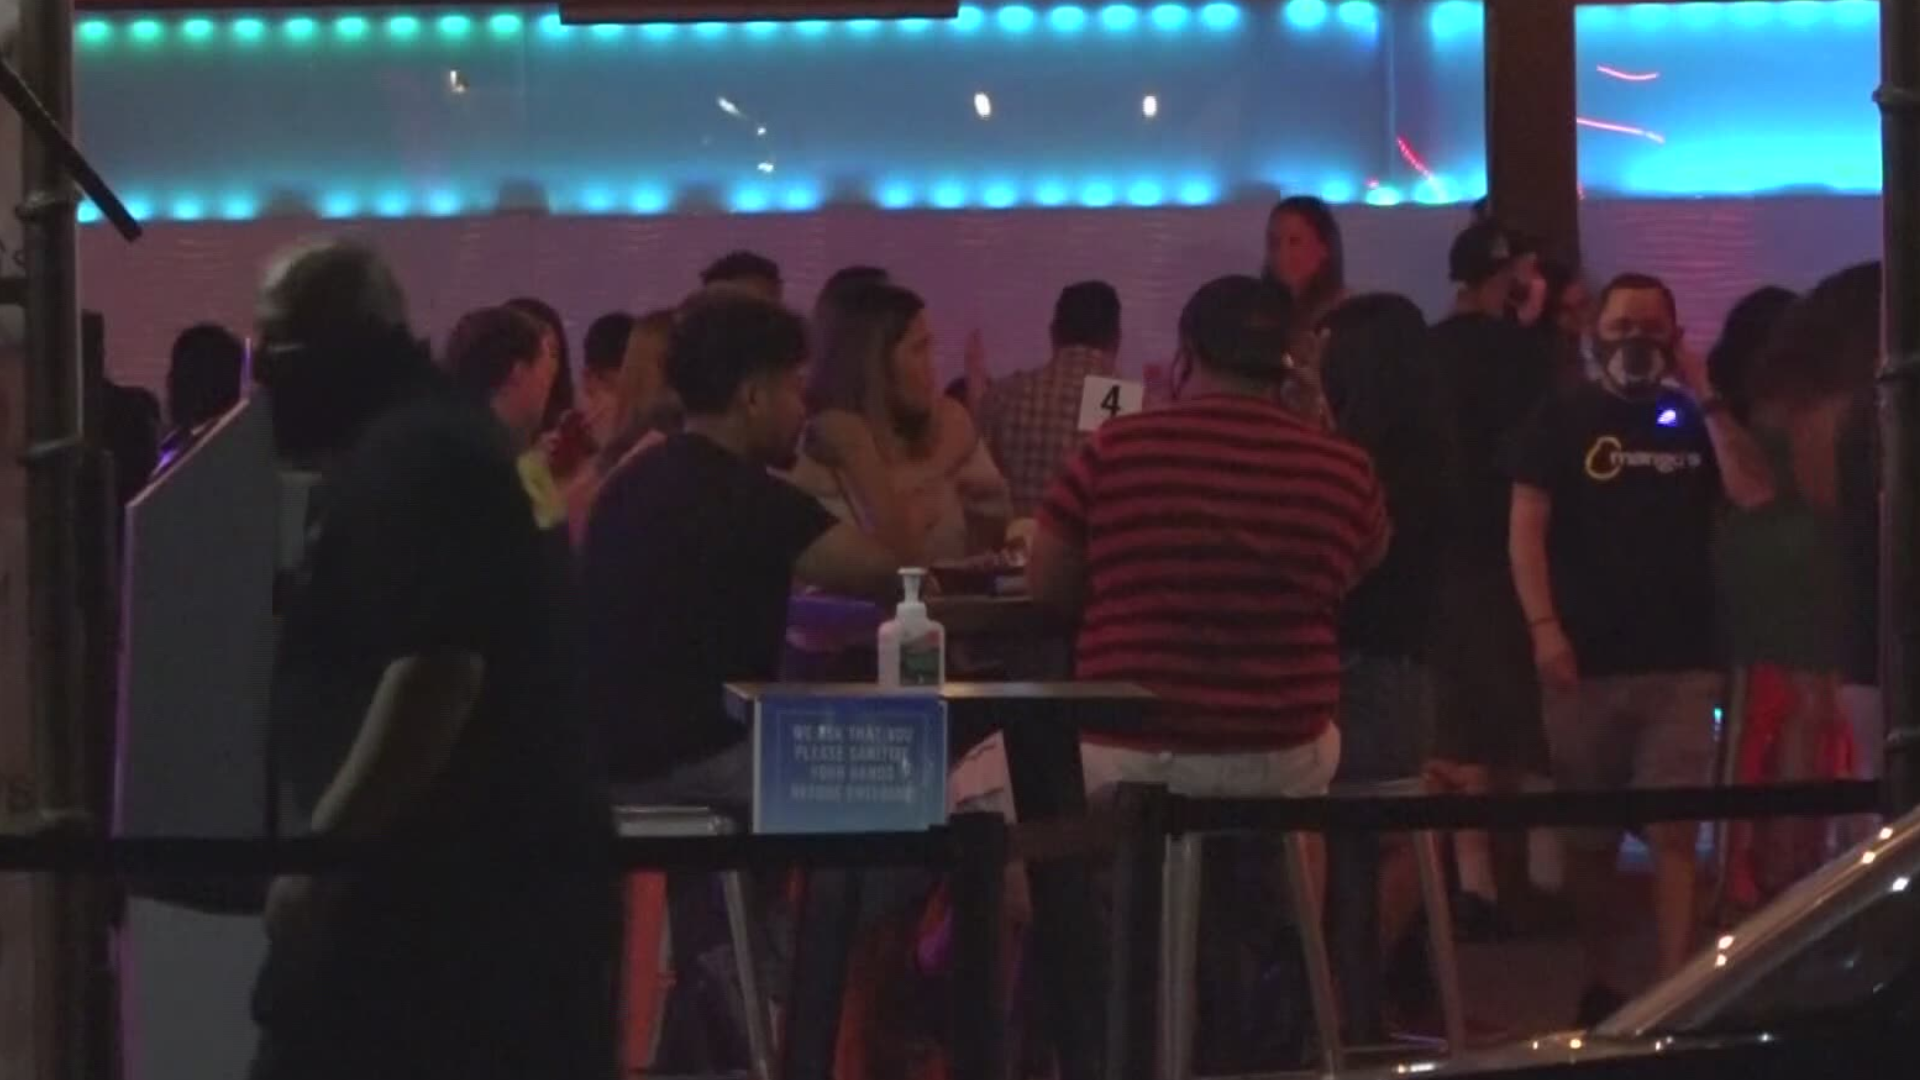 Sacramento has closed down bars just weeks after reopening as the number of coronavirus cases continue to rise.